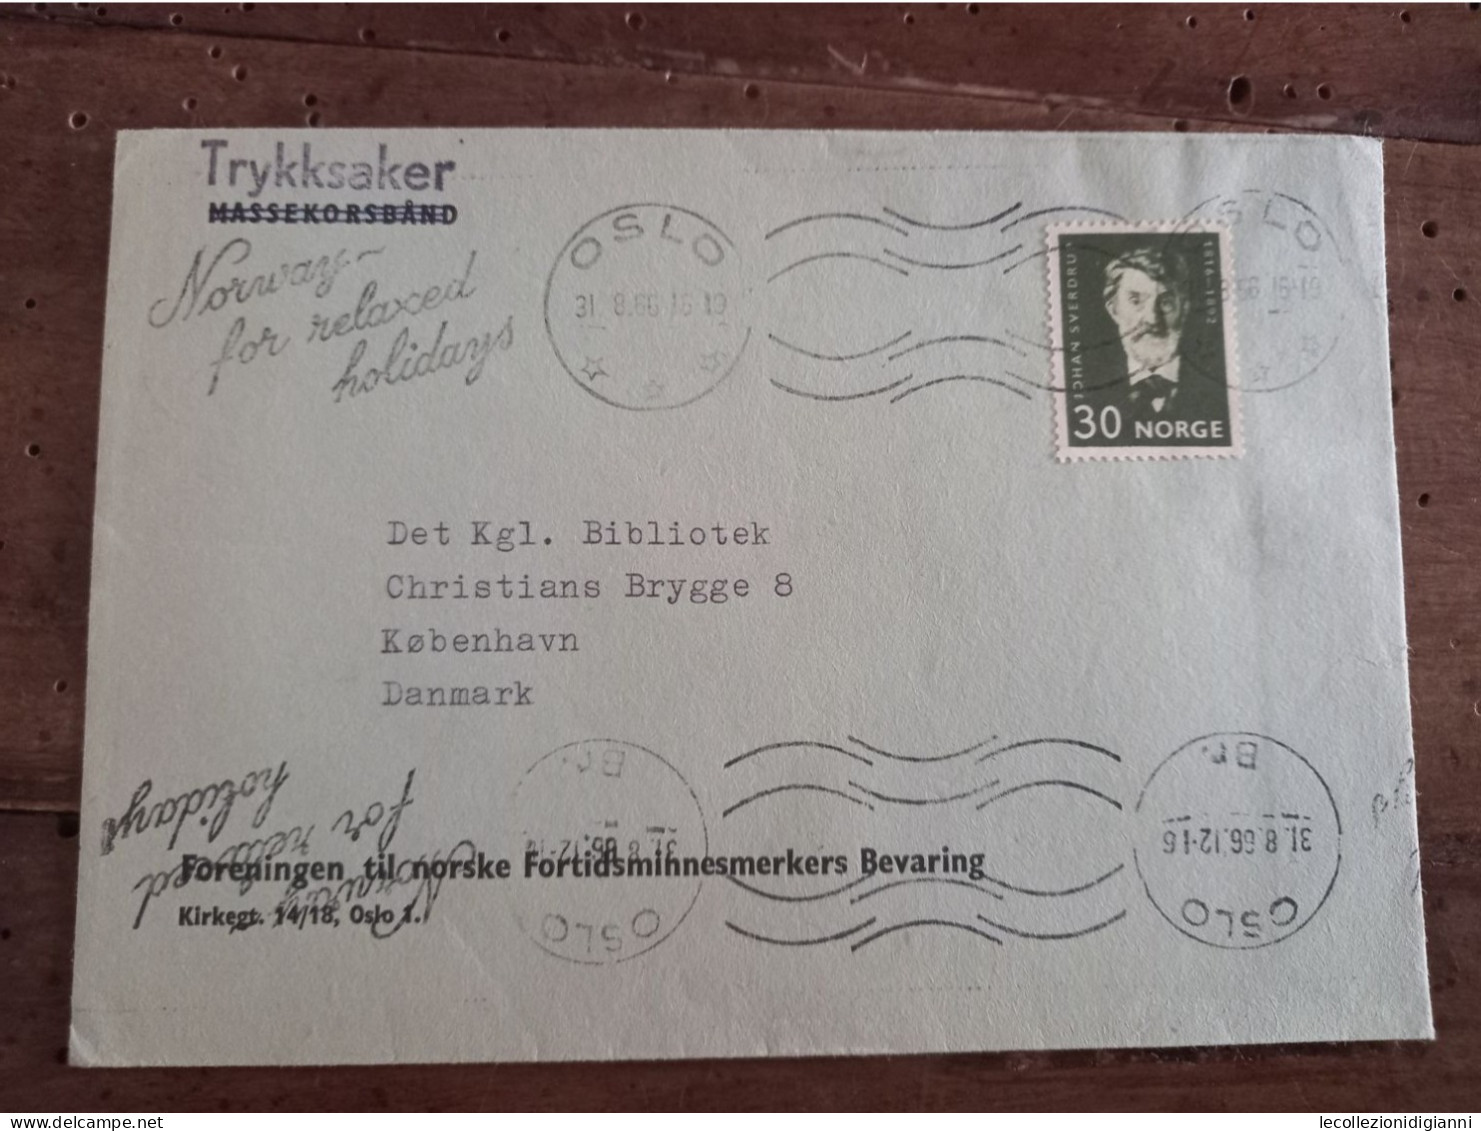 838) Norge Busta Stampe Trykksaker 1966 Viaggiata Da Oslo A Copenaghen Timbro Pubblicità Norway For Relaxed Holidays - Covers & Documents